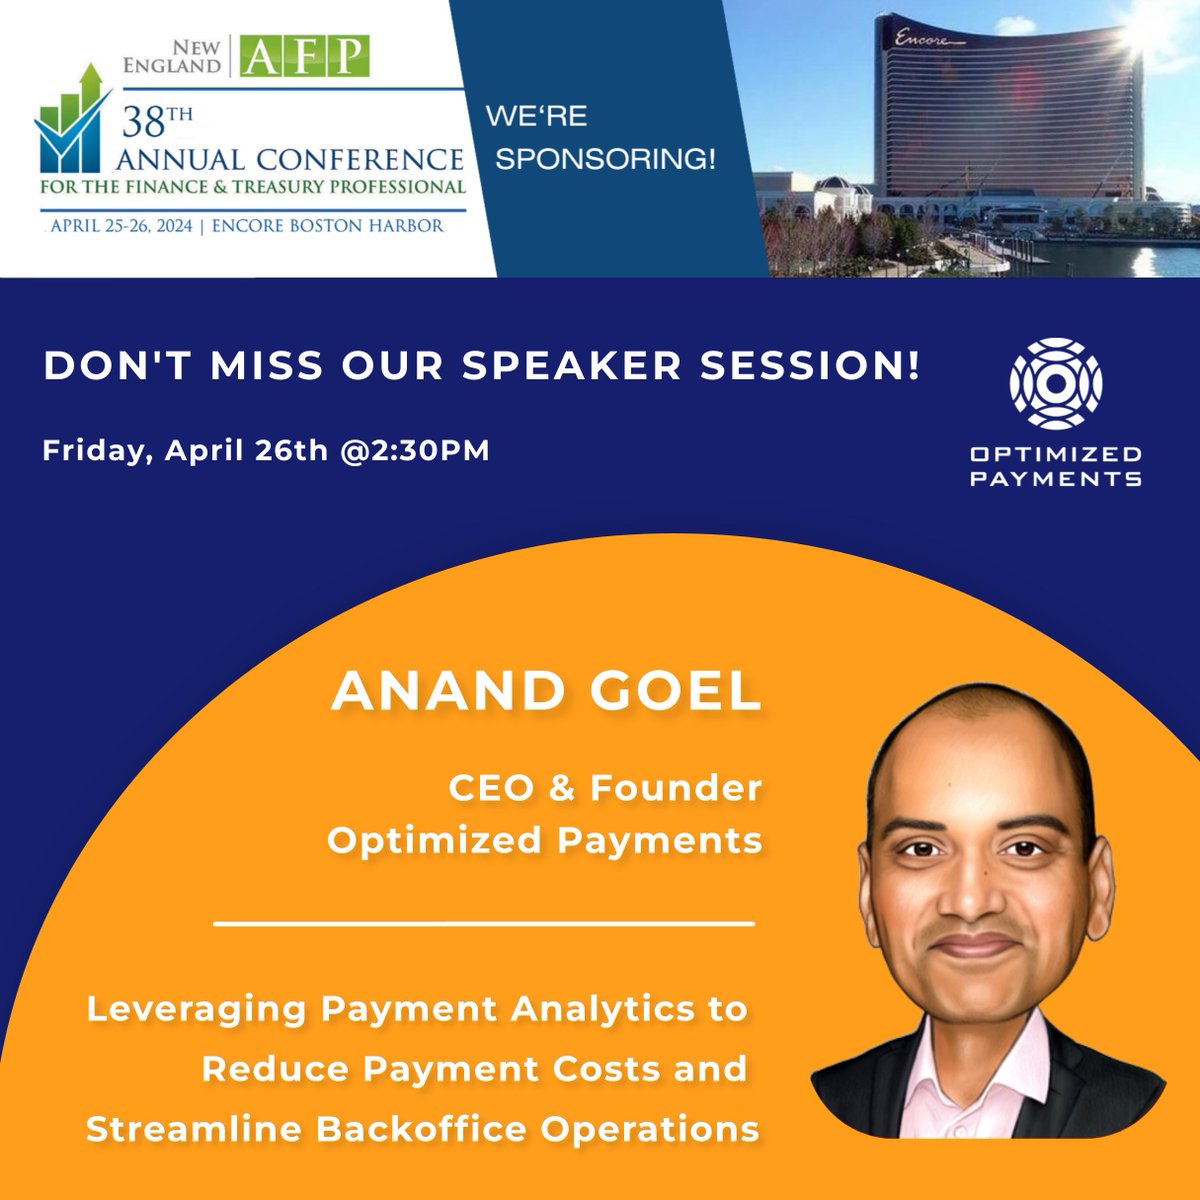 We're sponsoring the NEAFP annual conference! Don't forget to catch Anand Goel, our CEO & Founder, speaking on the impact of Payments Analytics! #optimizedpayments #tradeshow #payments